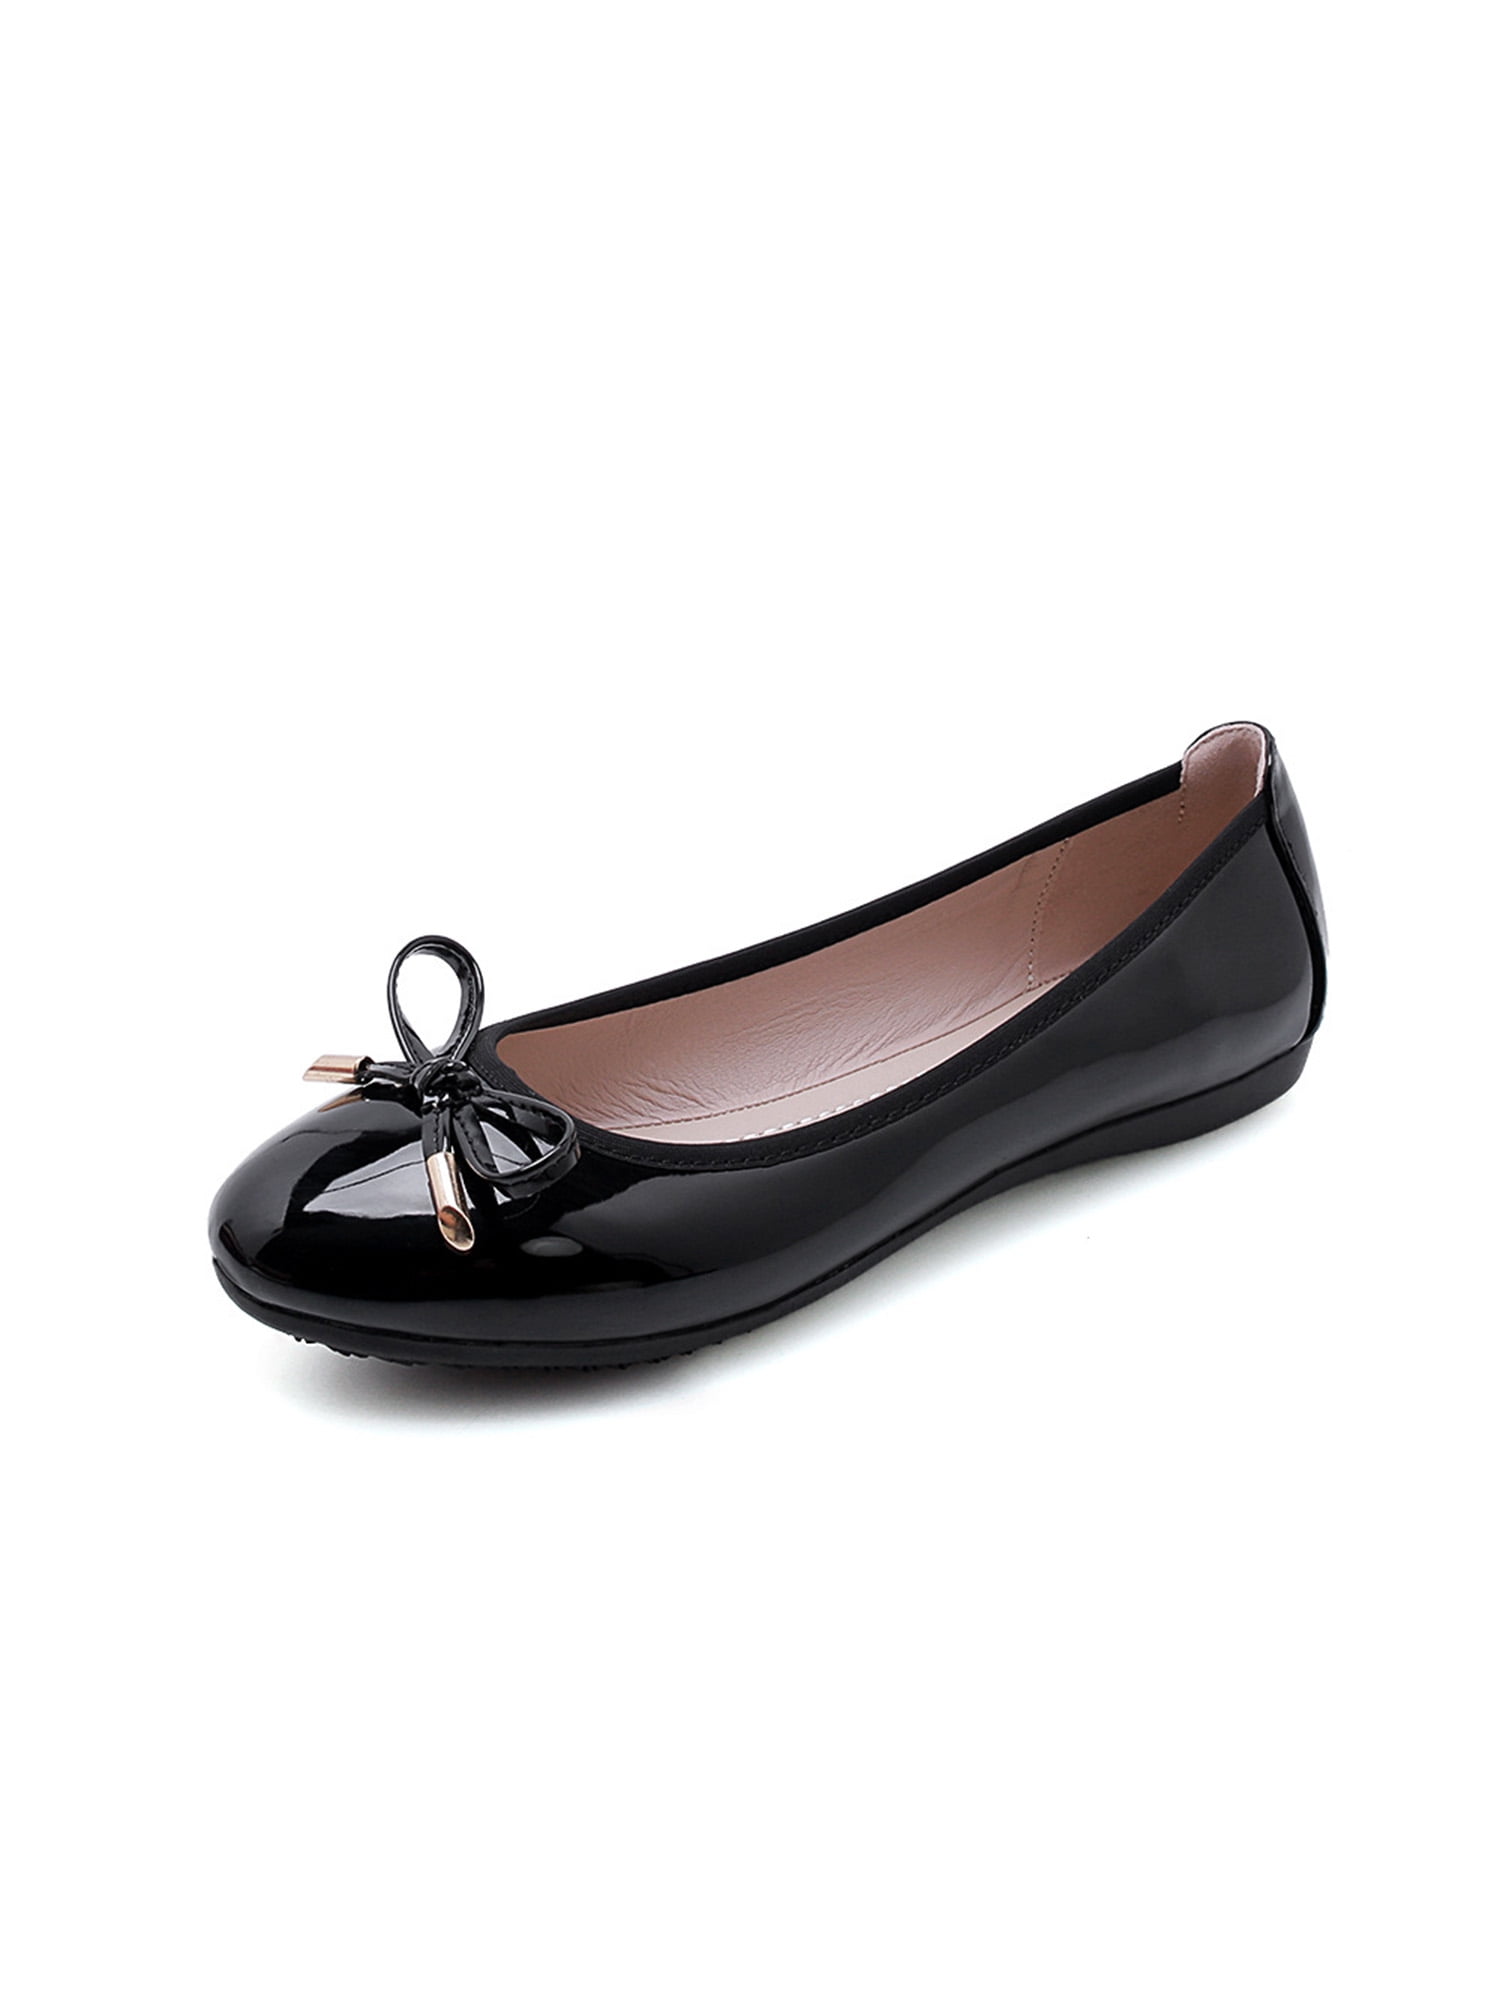 Sweet Ballet Flats Heels Shoes Womens Shiny Leather Bowknot Slip On Plus Sizes